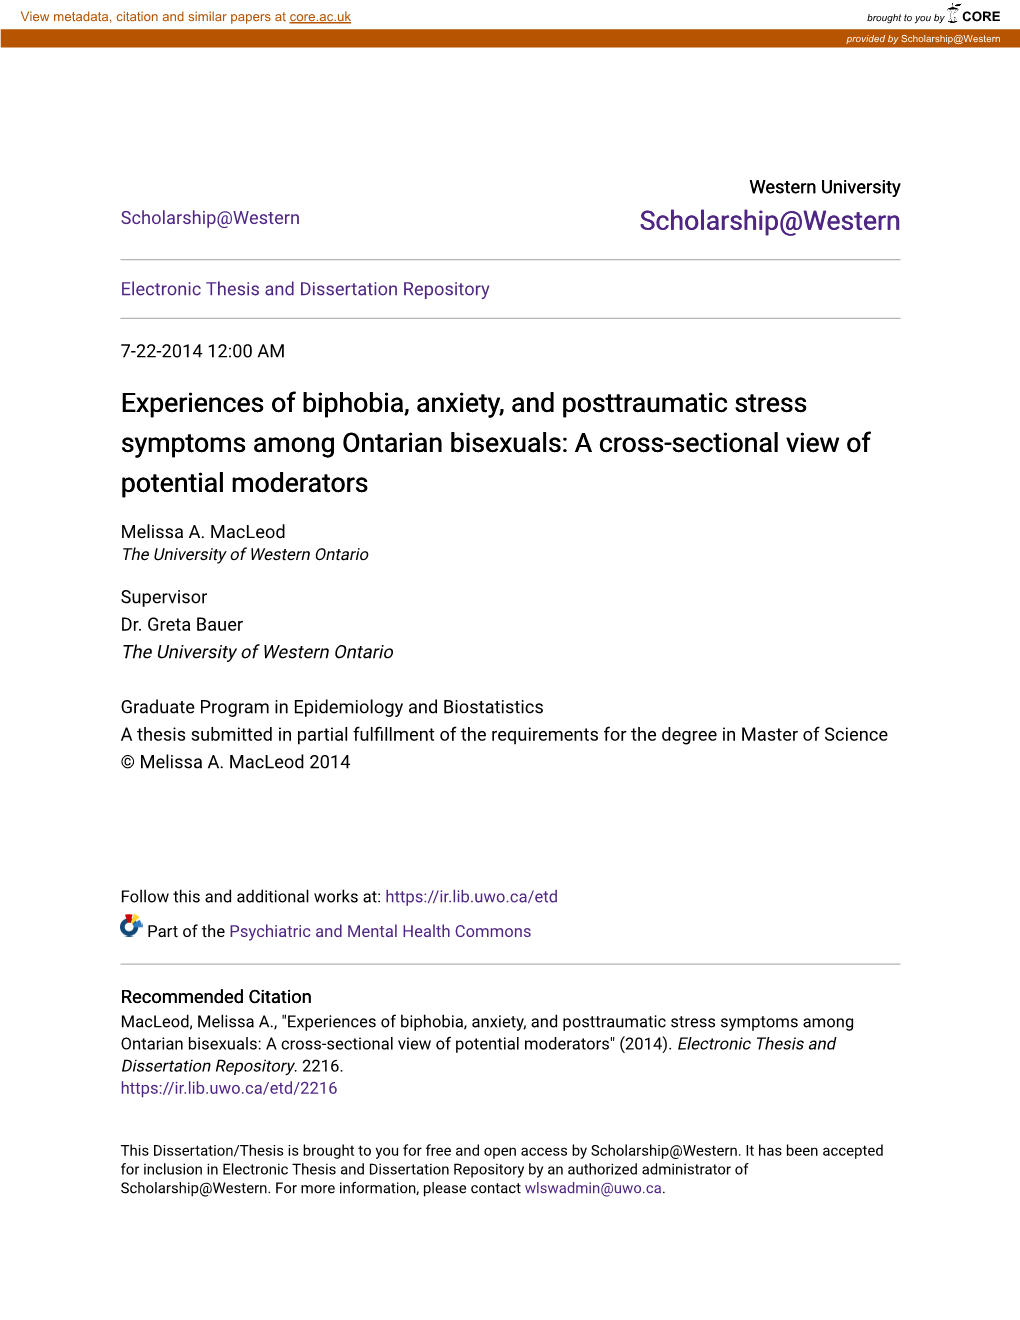 Experiences of Biphobia, Anxiety, and Posttraumatic Stress Symptoms Among Ontarian Bisexuals: a Cross-Sectional View of Potential Moderators